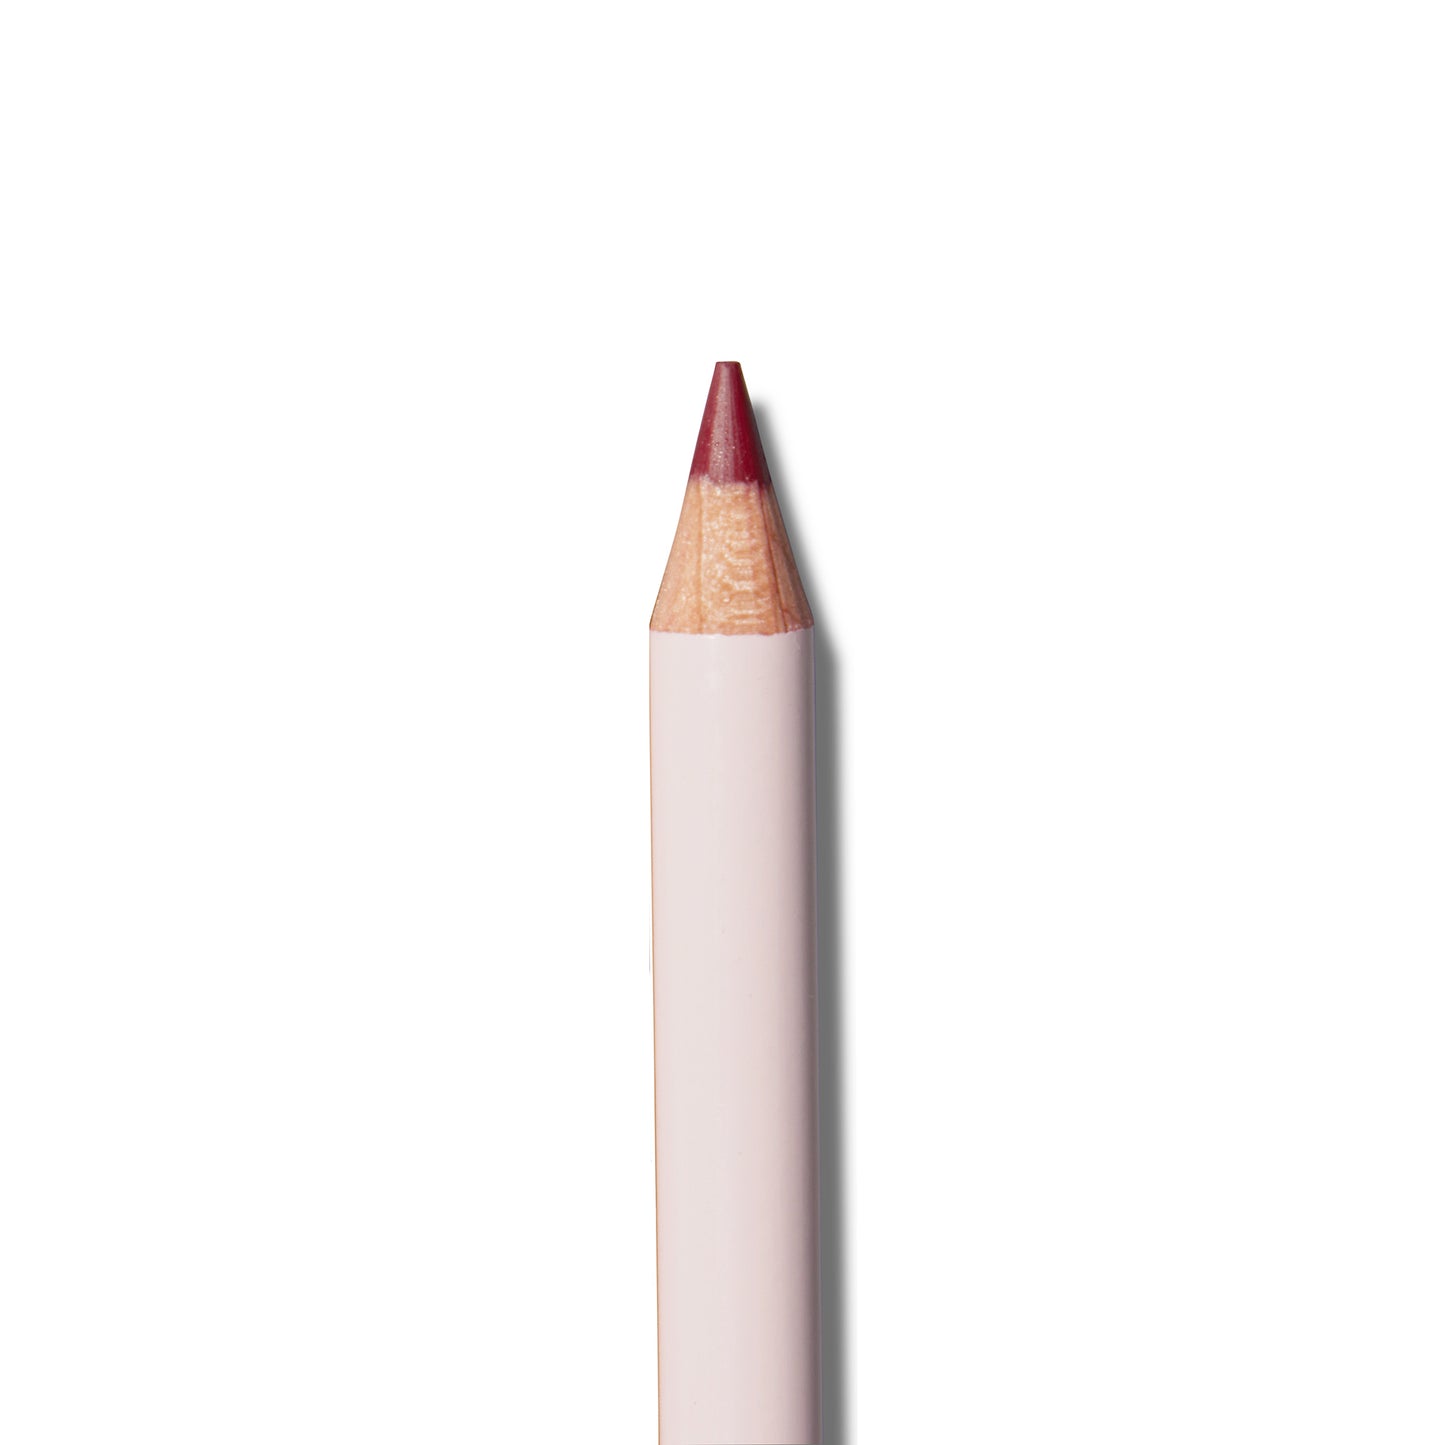 A close up of the tip of the Monika Blunder Hot Line Lipliner Pencil in Kelly.